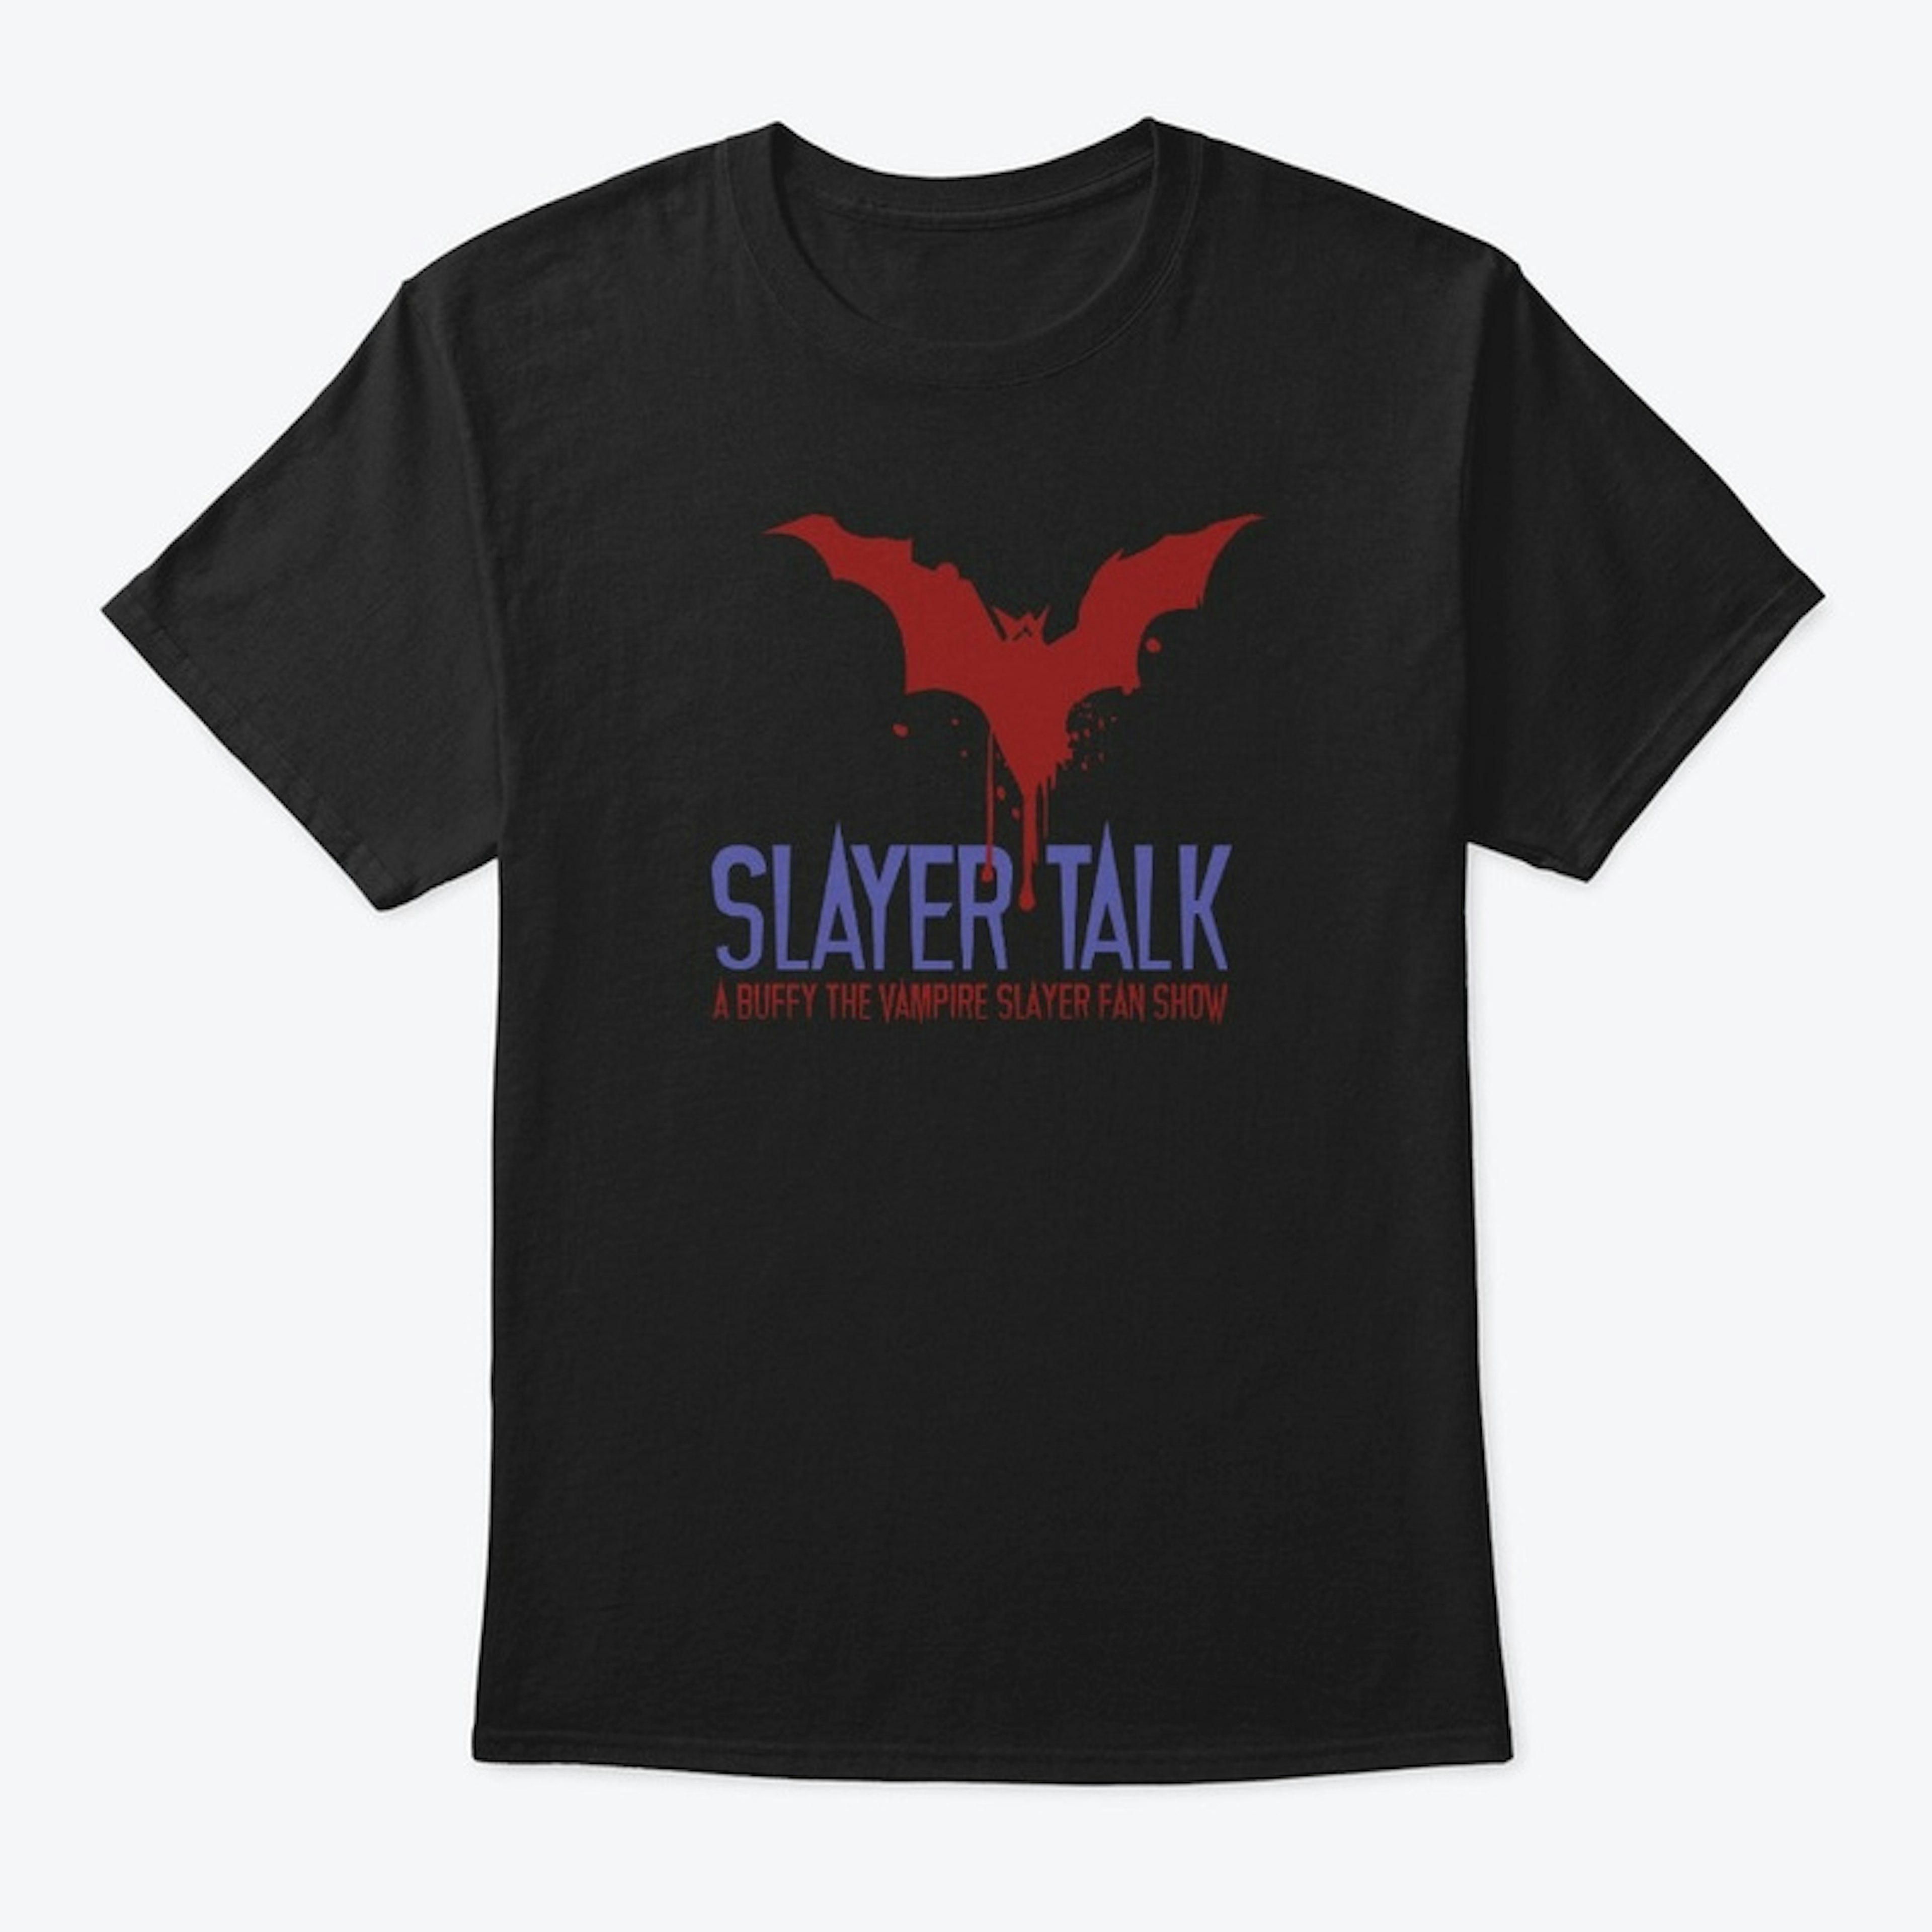 The Slayer Talk Limited Official T-Shirt